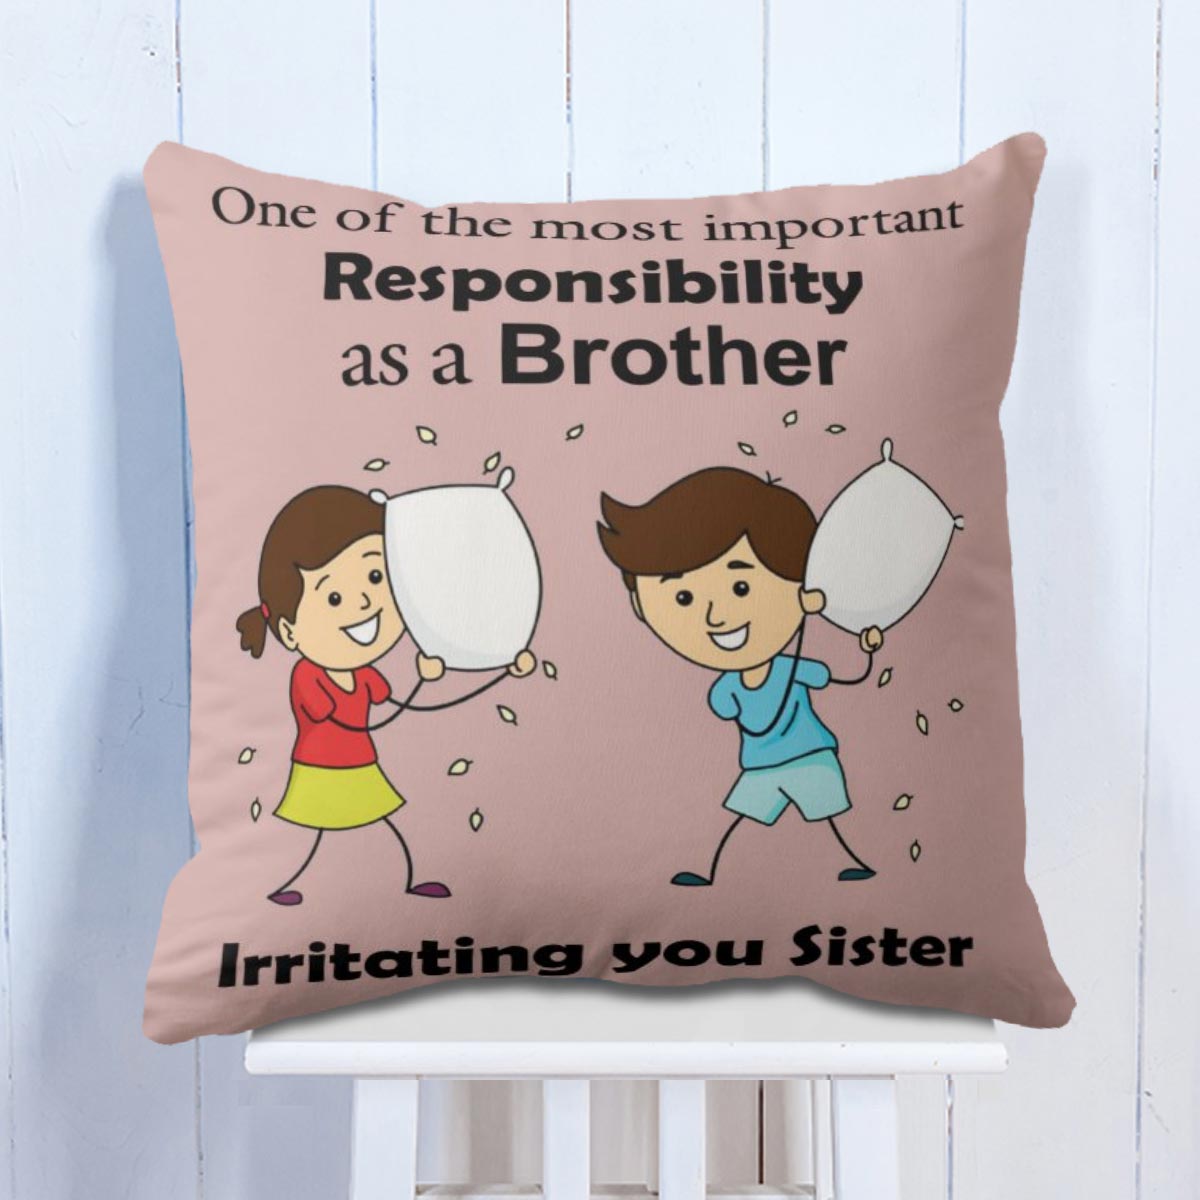 Sister's responsibility to irritate brother Cushion